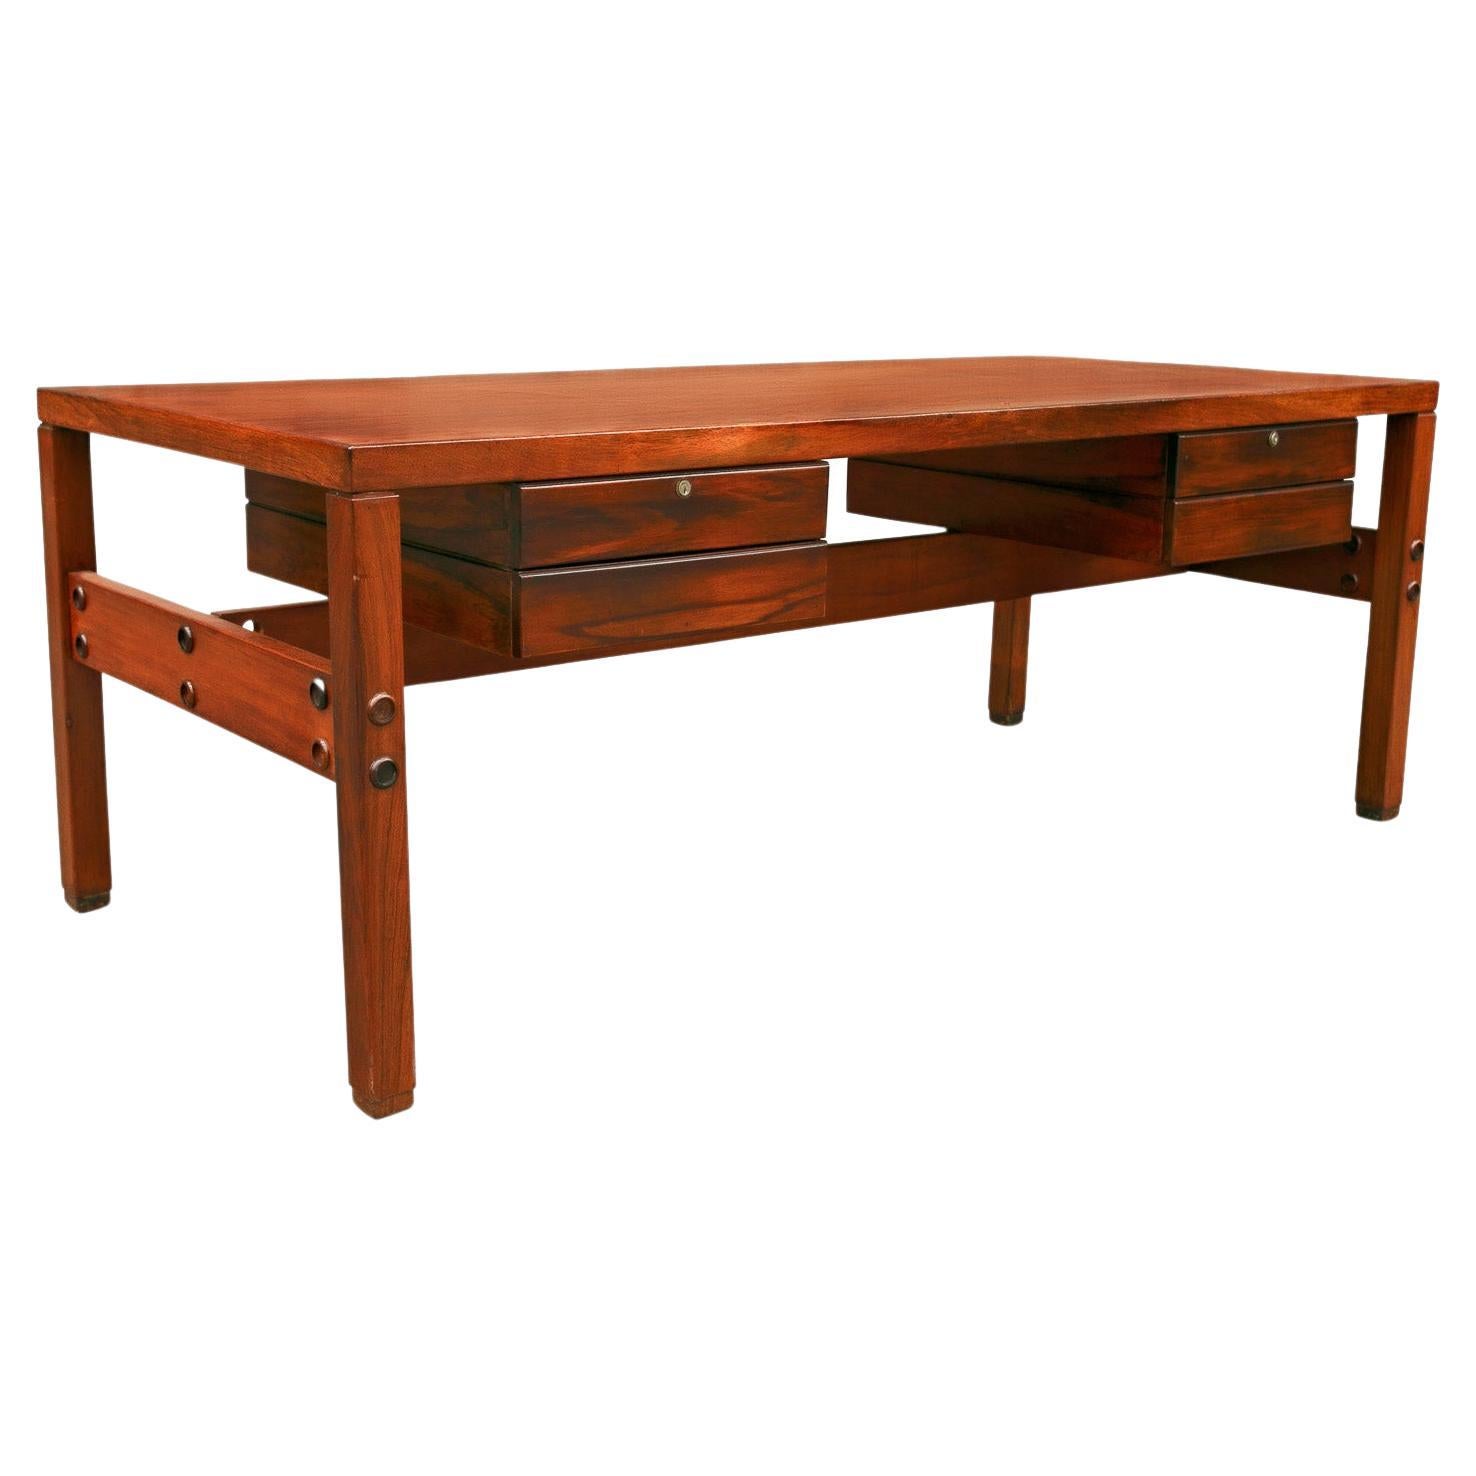 Brazilian Modern Desk in Hardwood with Floating Drawers, Sergio Rodrigues, 1960s For Sale